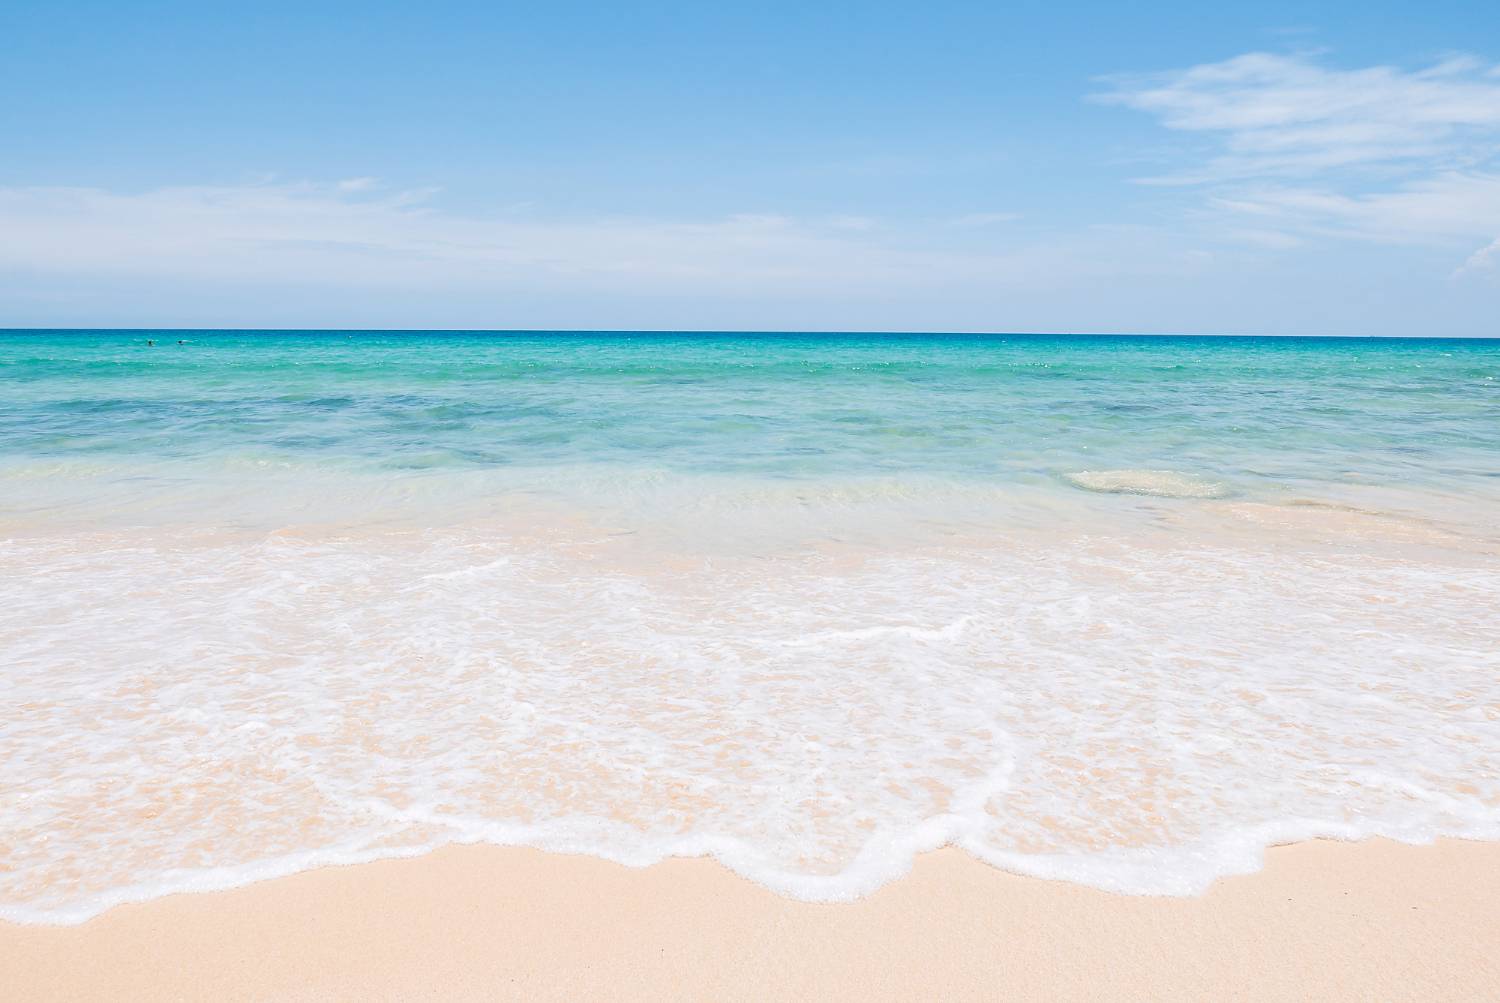 Pristine beach with crystal clear water under a clear blue sky, serene and inviting.